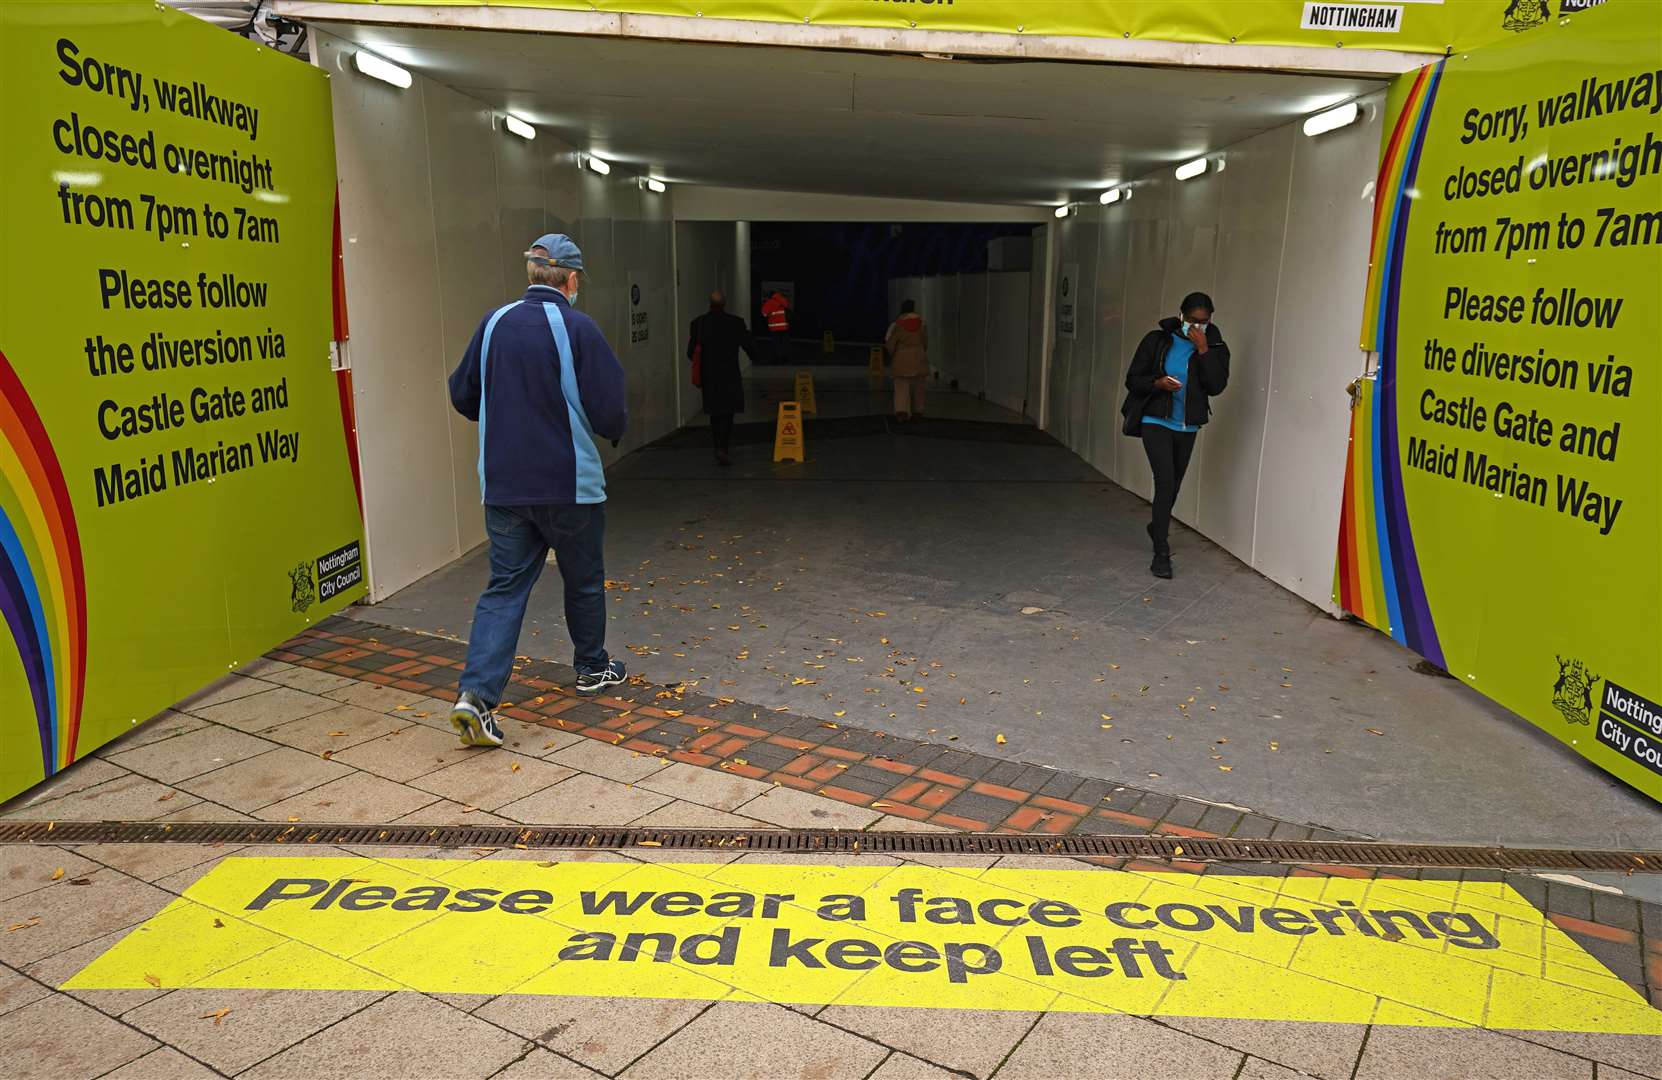 People enter an underpass in Nottingham (Tim Goode/PA)